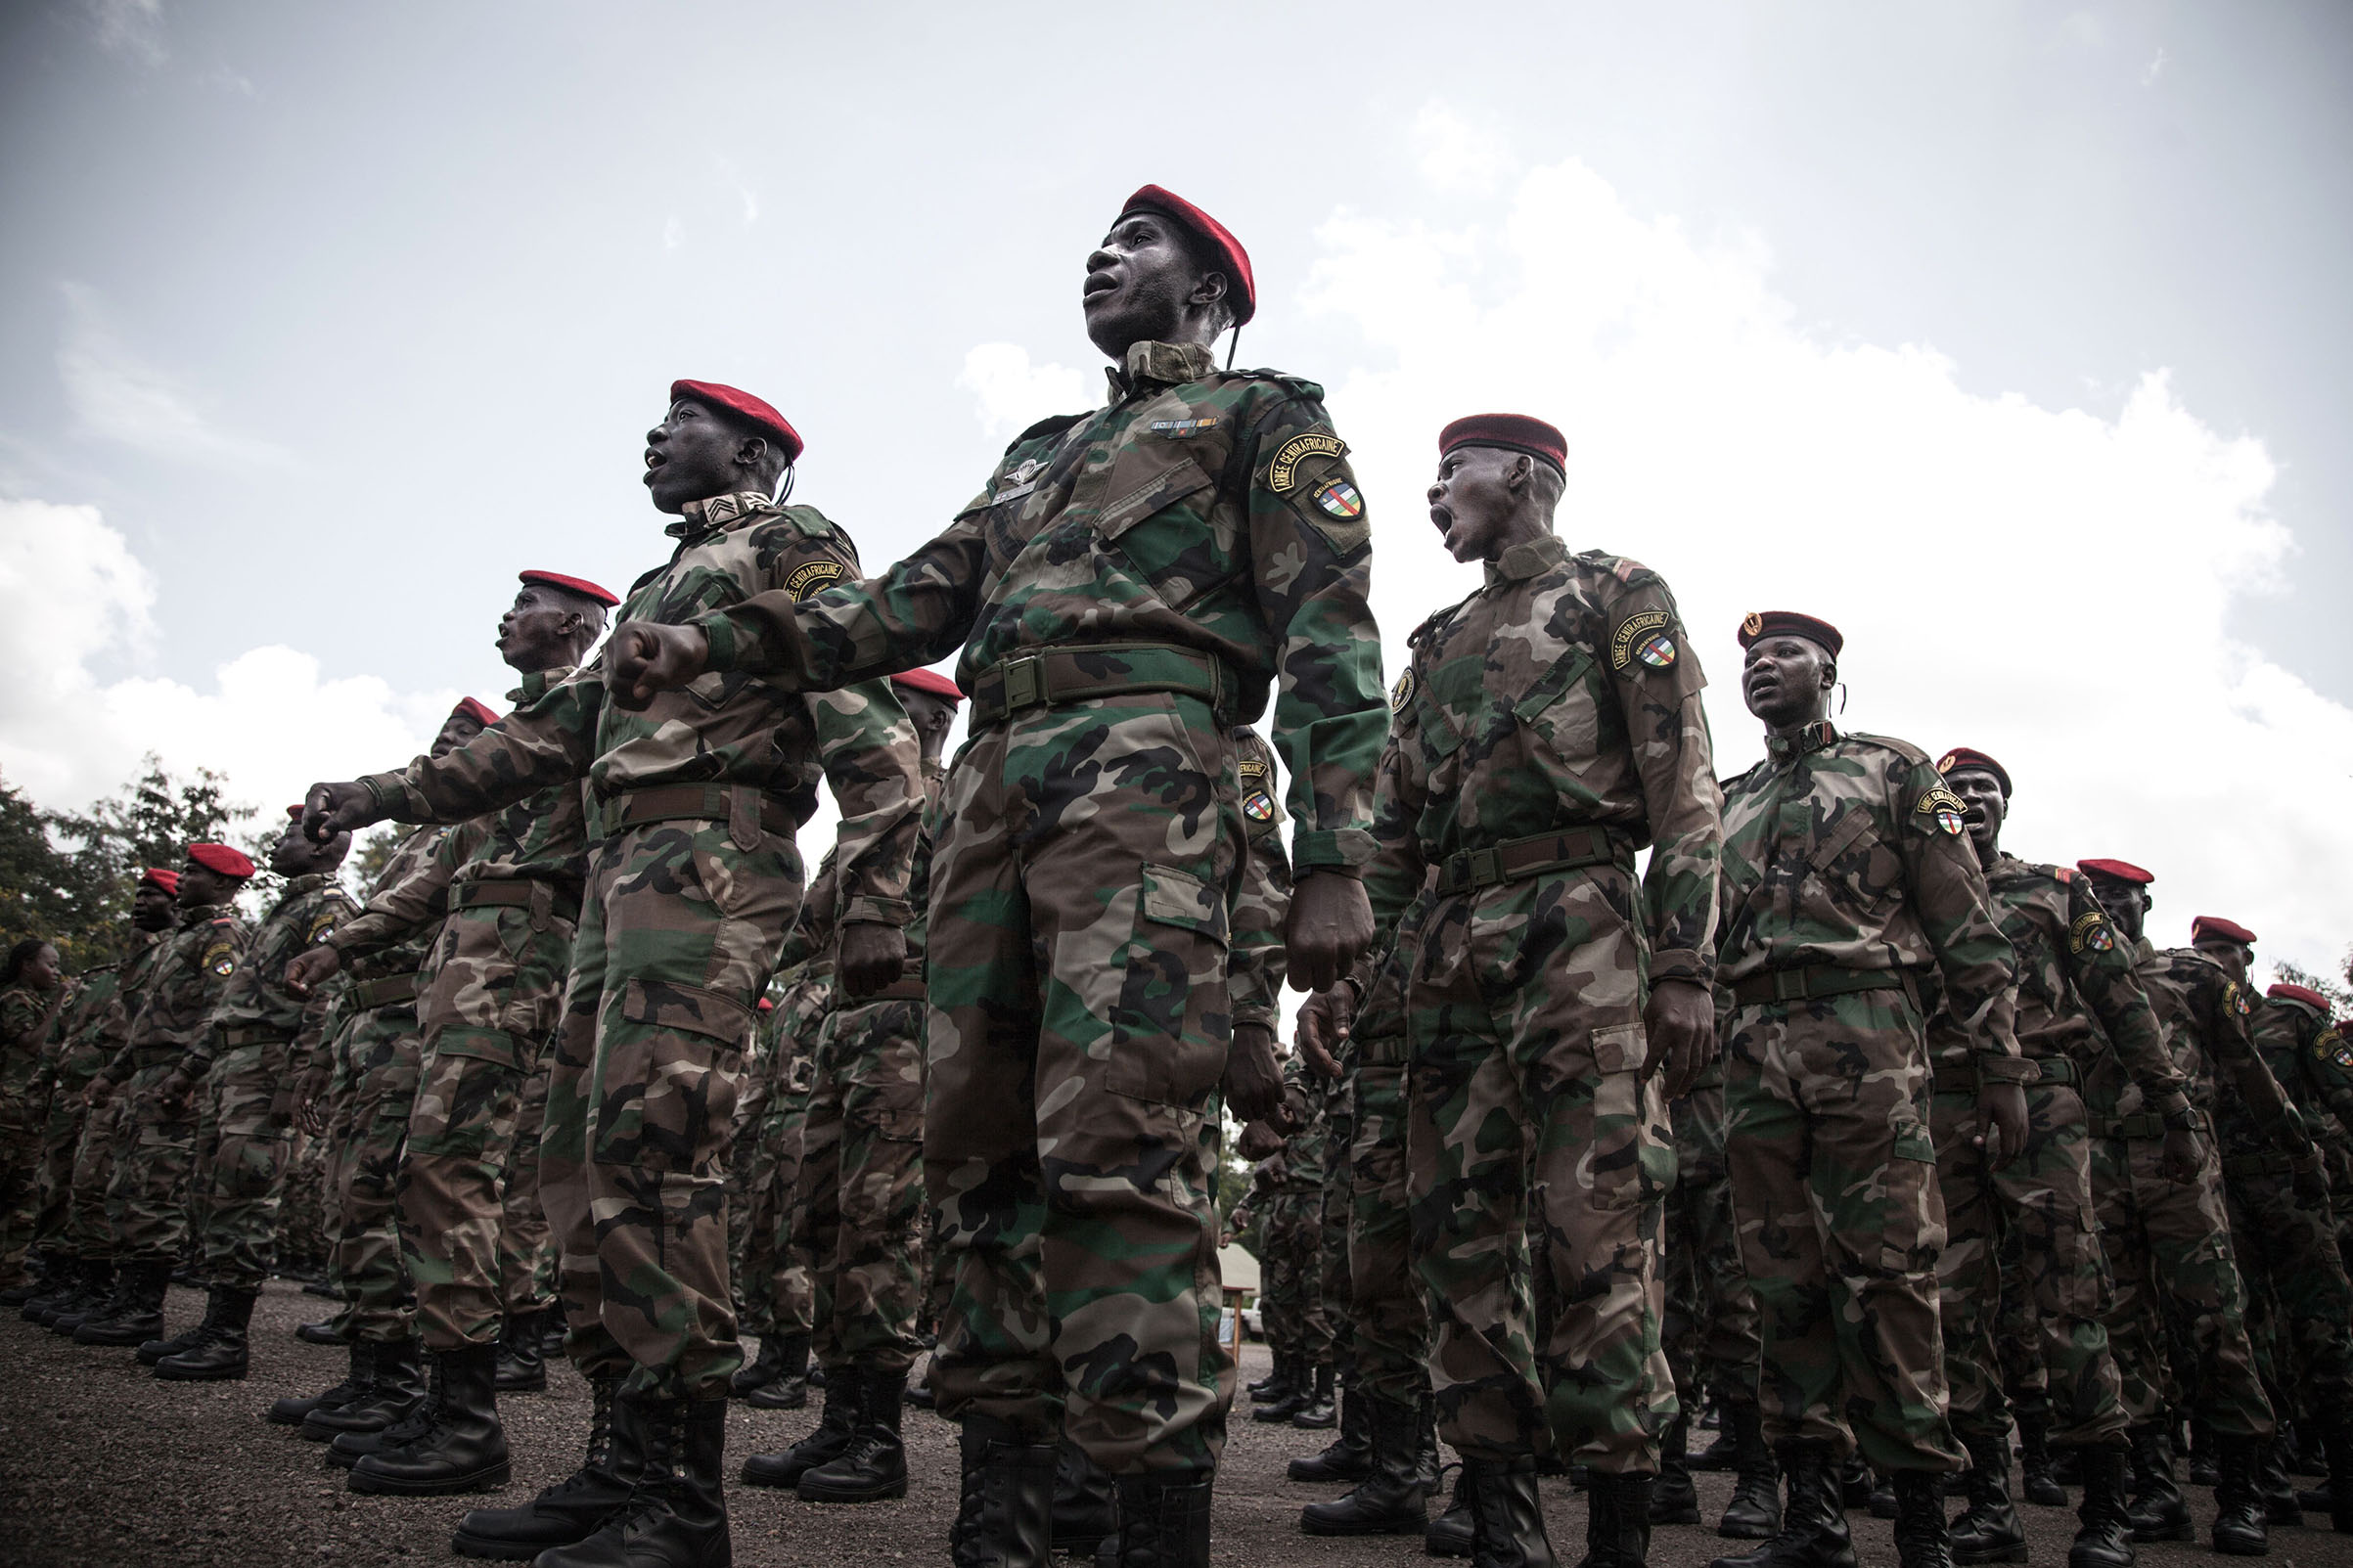 Russian consultants have trained Central African armed forces, seen here in August 2018. (Florent Vergnes—AFP/Getty Images)